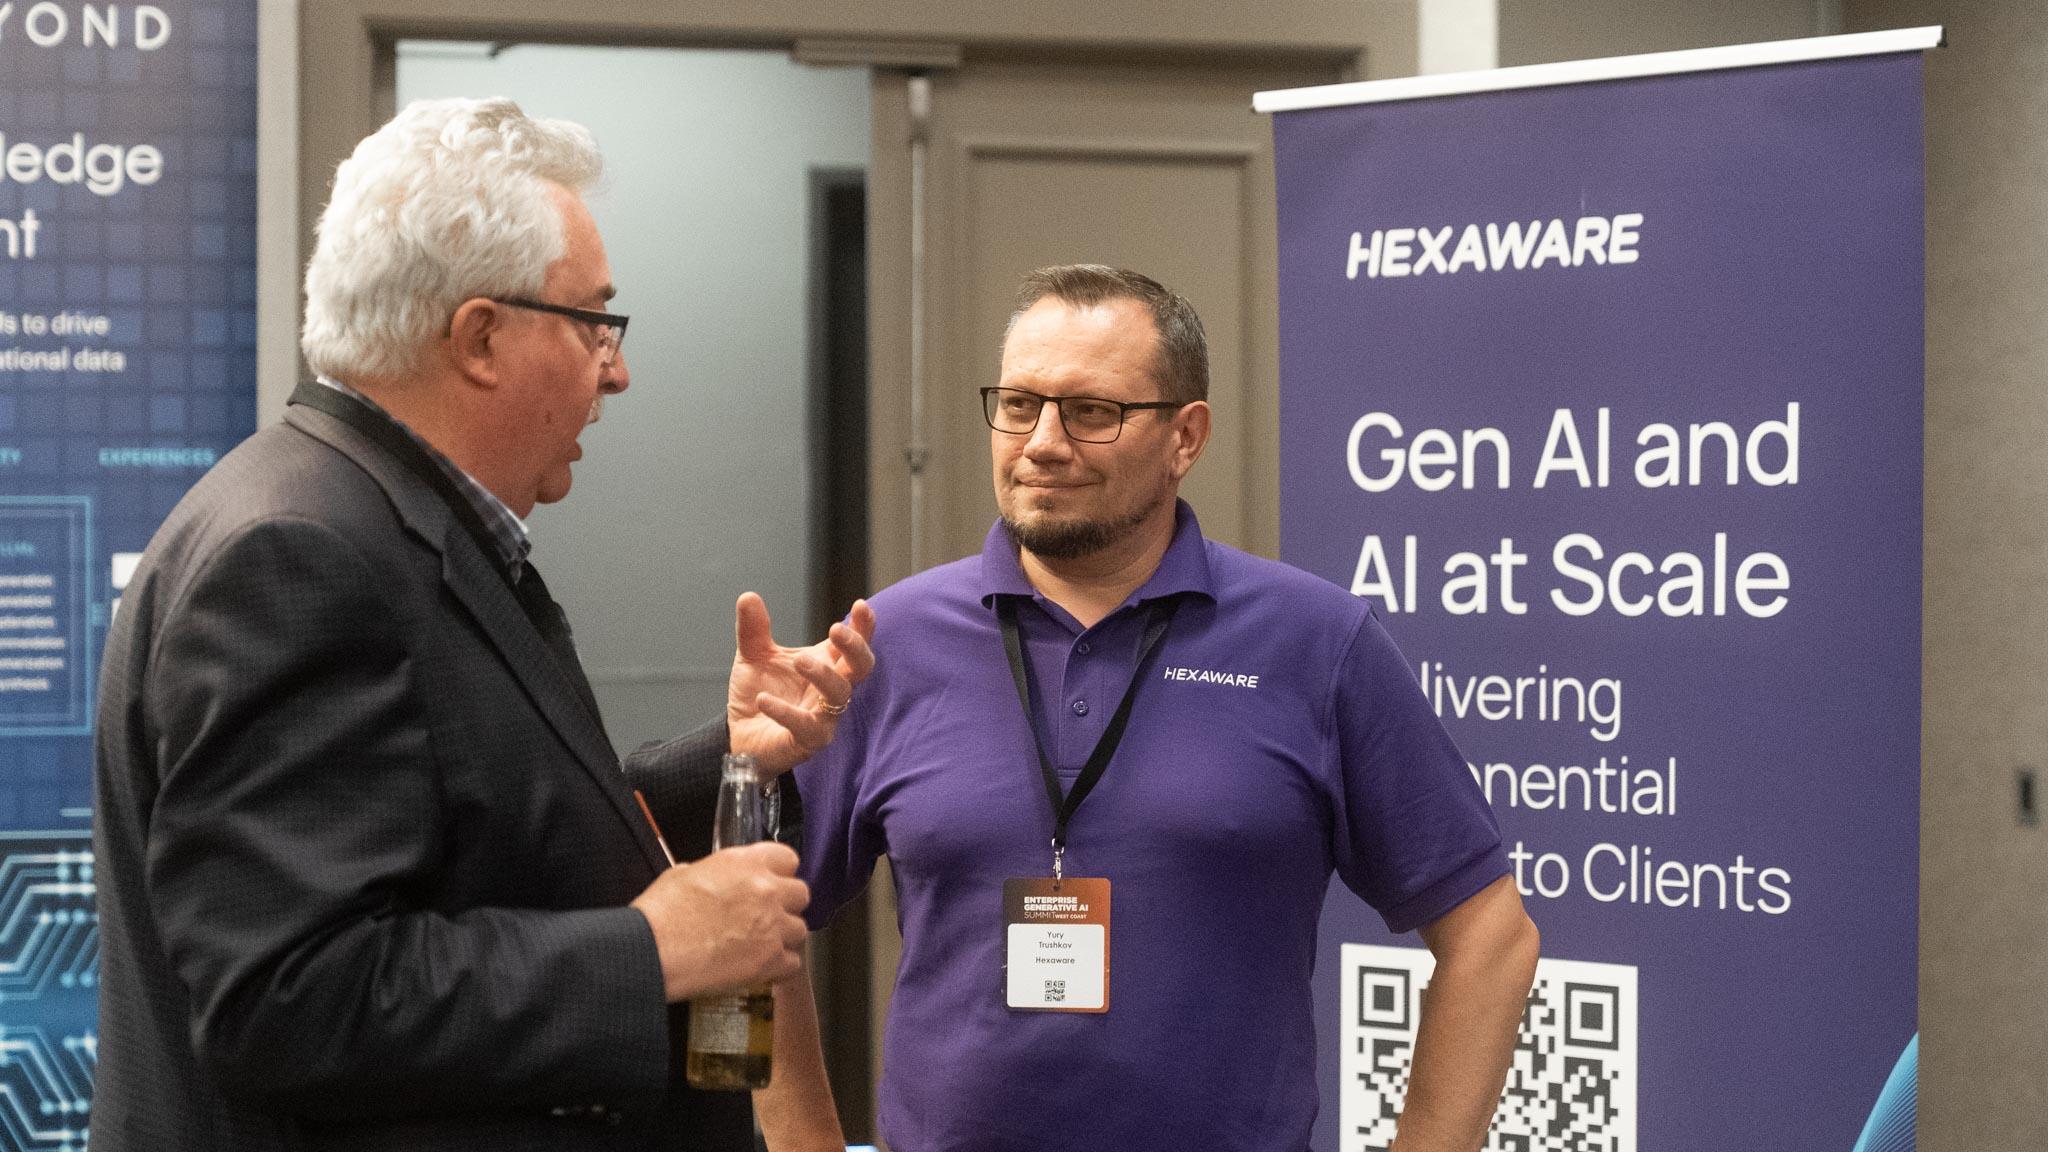 Hexaware networking booth